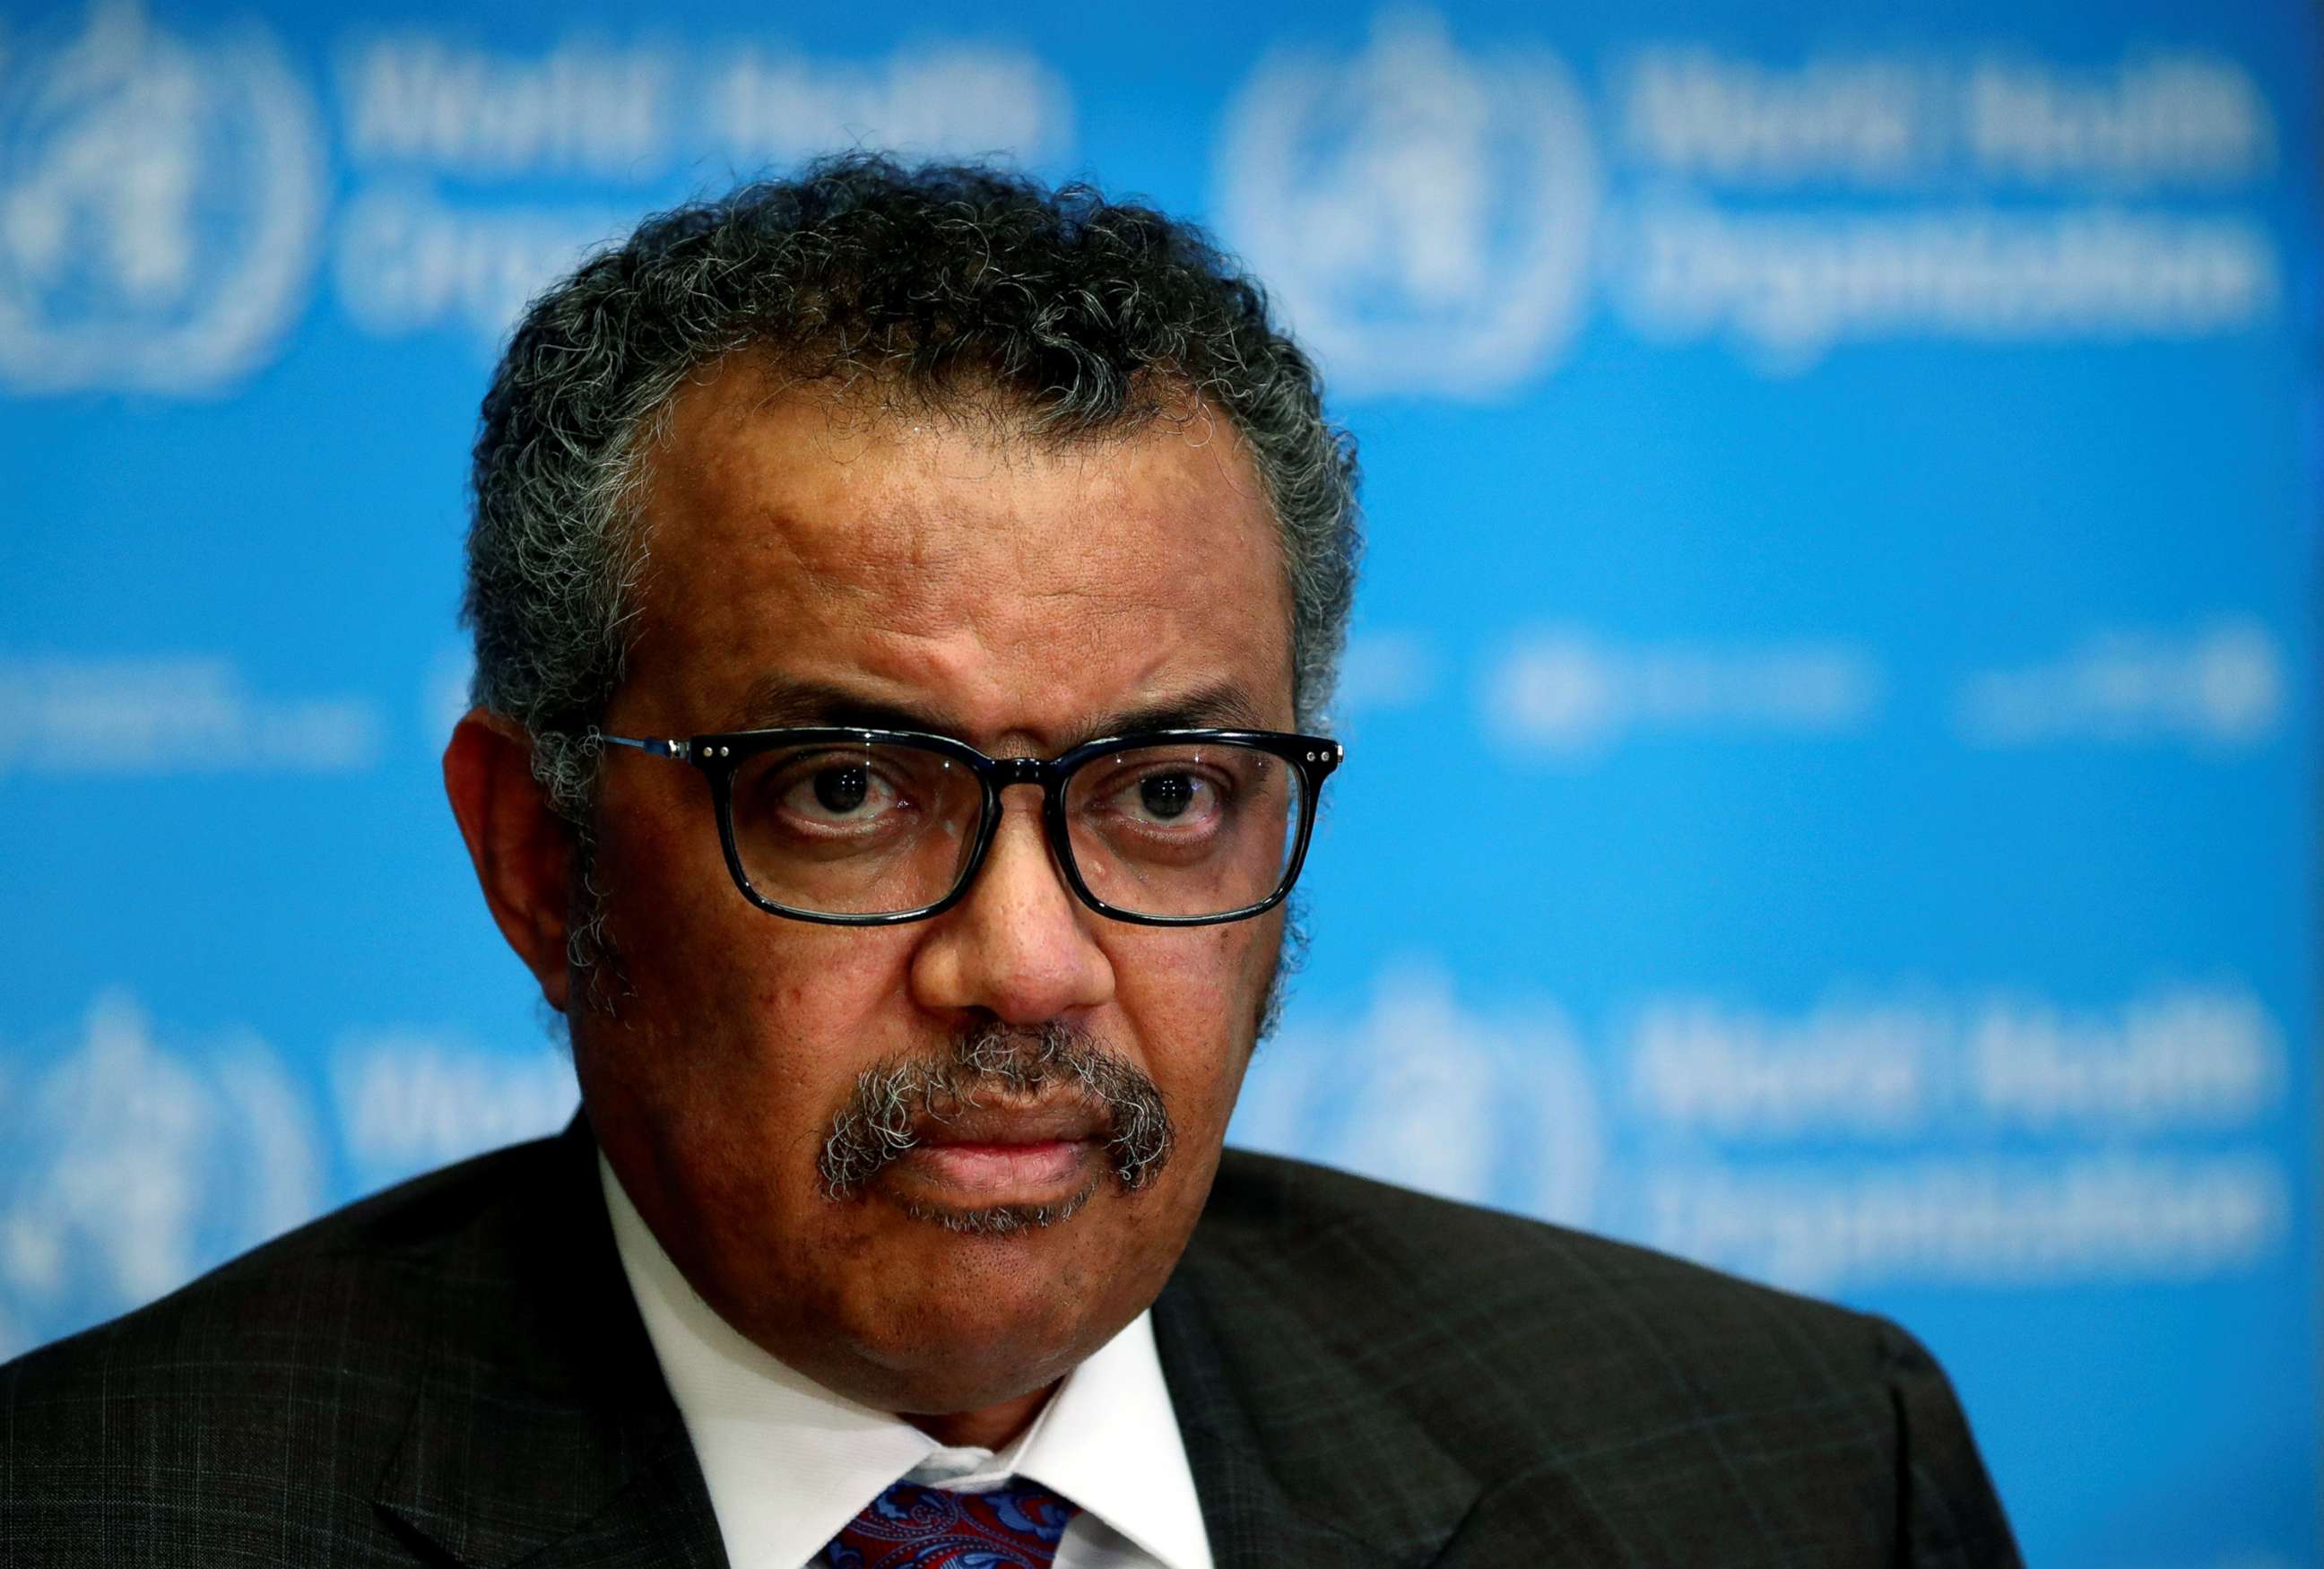 PHOTO: FILE PHOTO: Director General of the World Health Organization (WHO) Tedros Adhanom Ghebreyesus attends a news conference on the situation of the coronavirus (COVID-2019), in Geneva, Switzerland, February 28, 2020. REUTERS/Denis Balibouse/File Photo